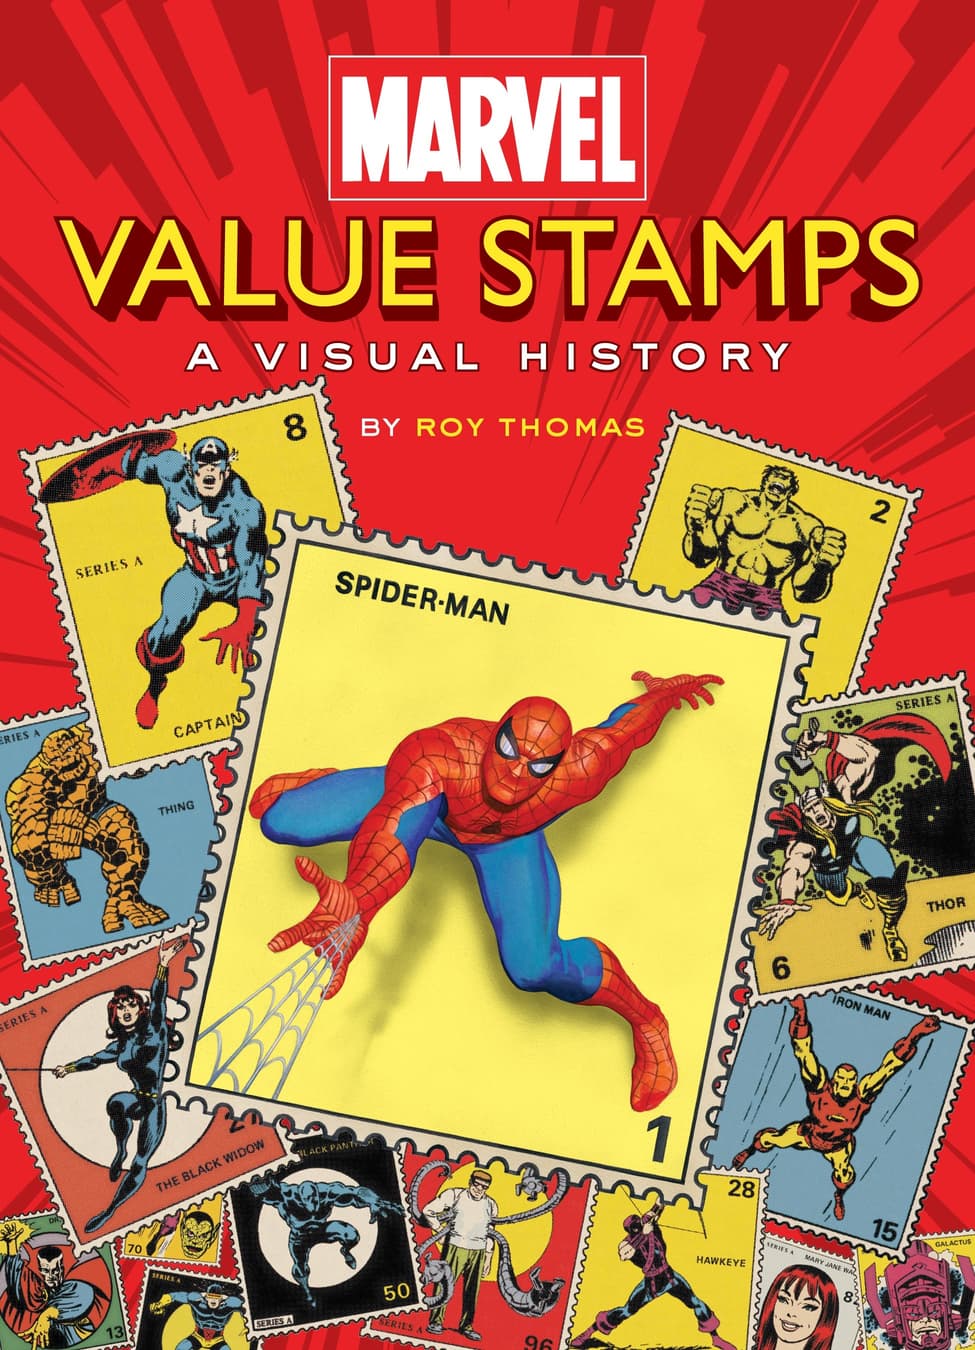 Cover to Marvel Value Stamps: A Visual History by Alex Ross.